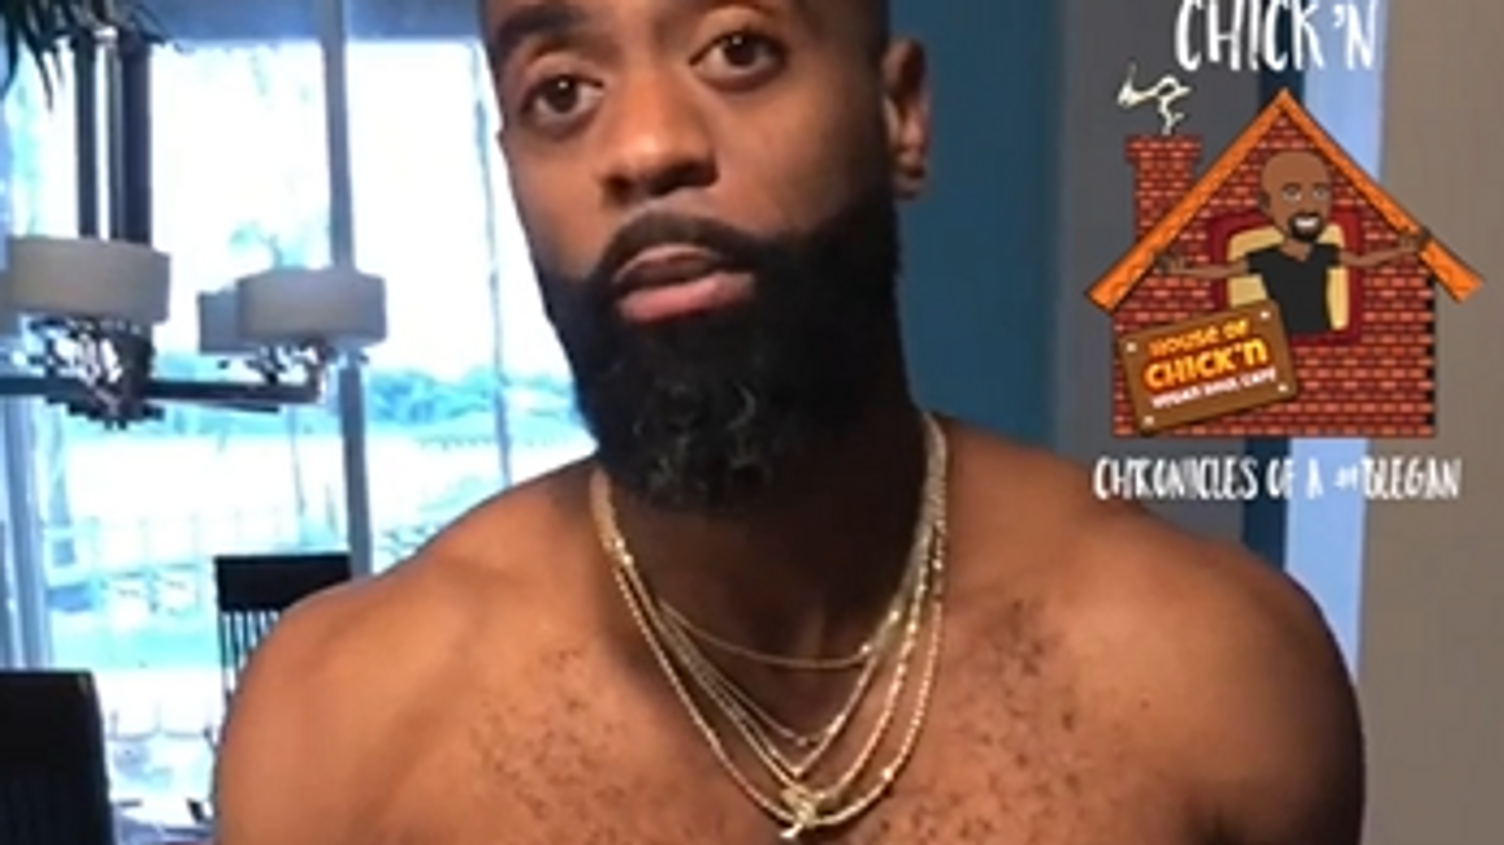 Tyson Gay Approves House of Chick'n